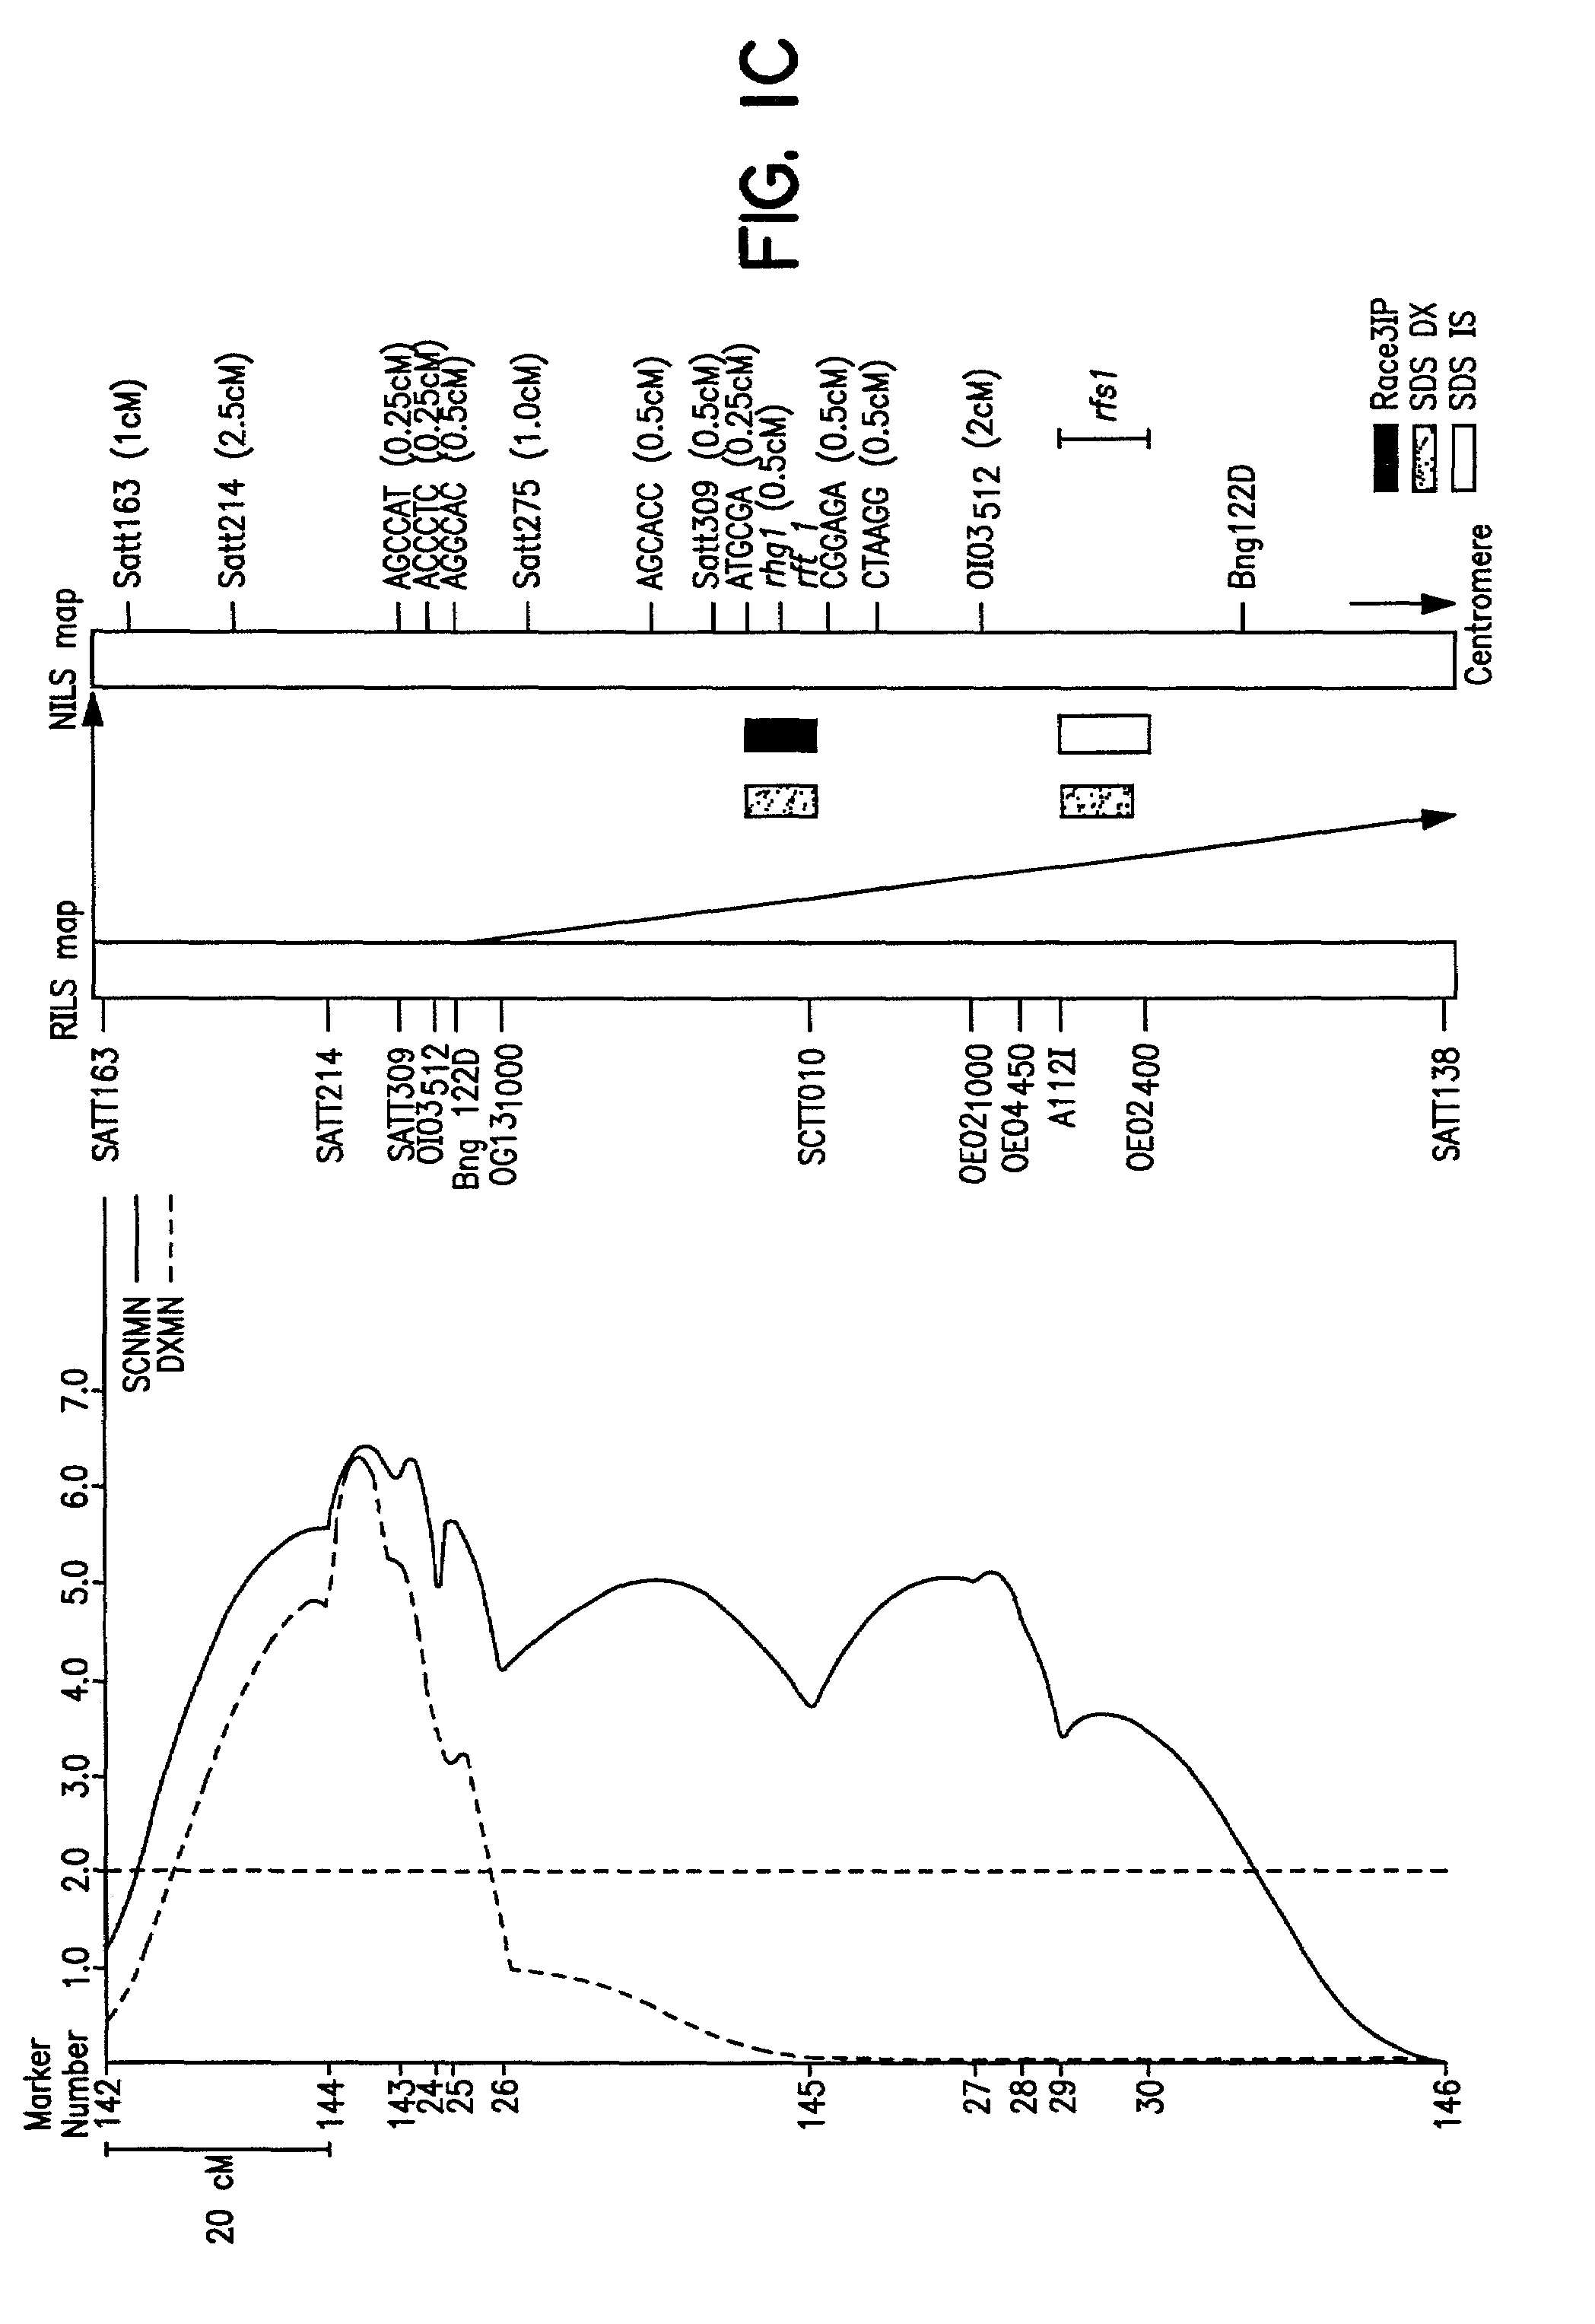 Method of determining soybean sudden death syndrome resistance in a soybean plant